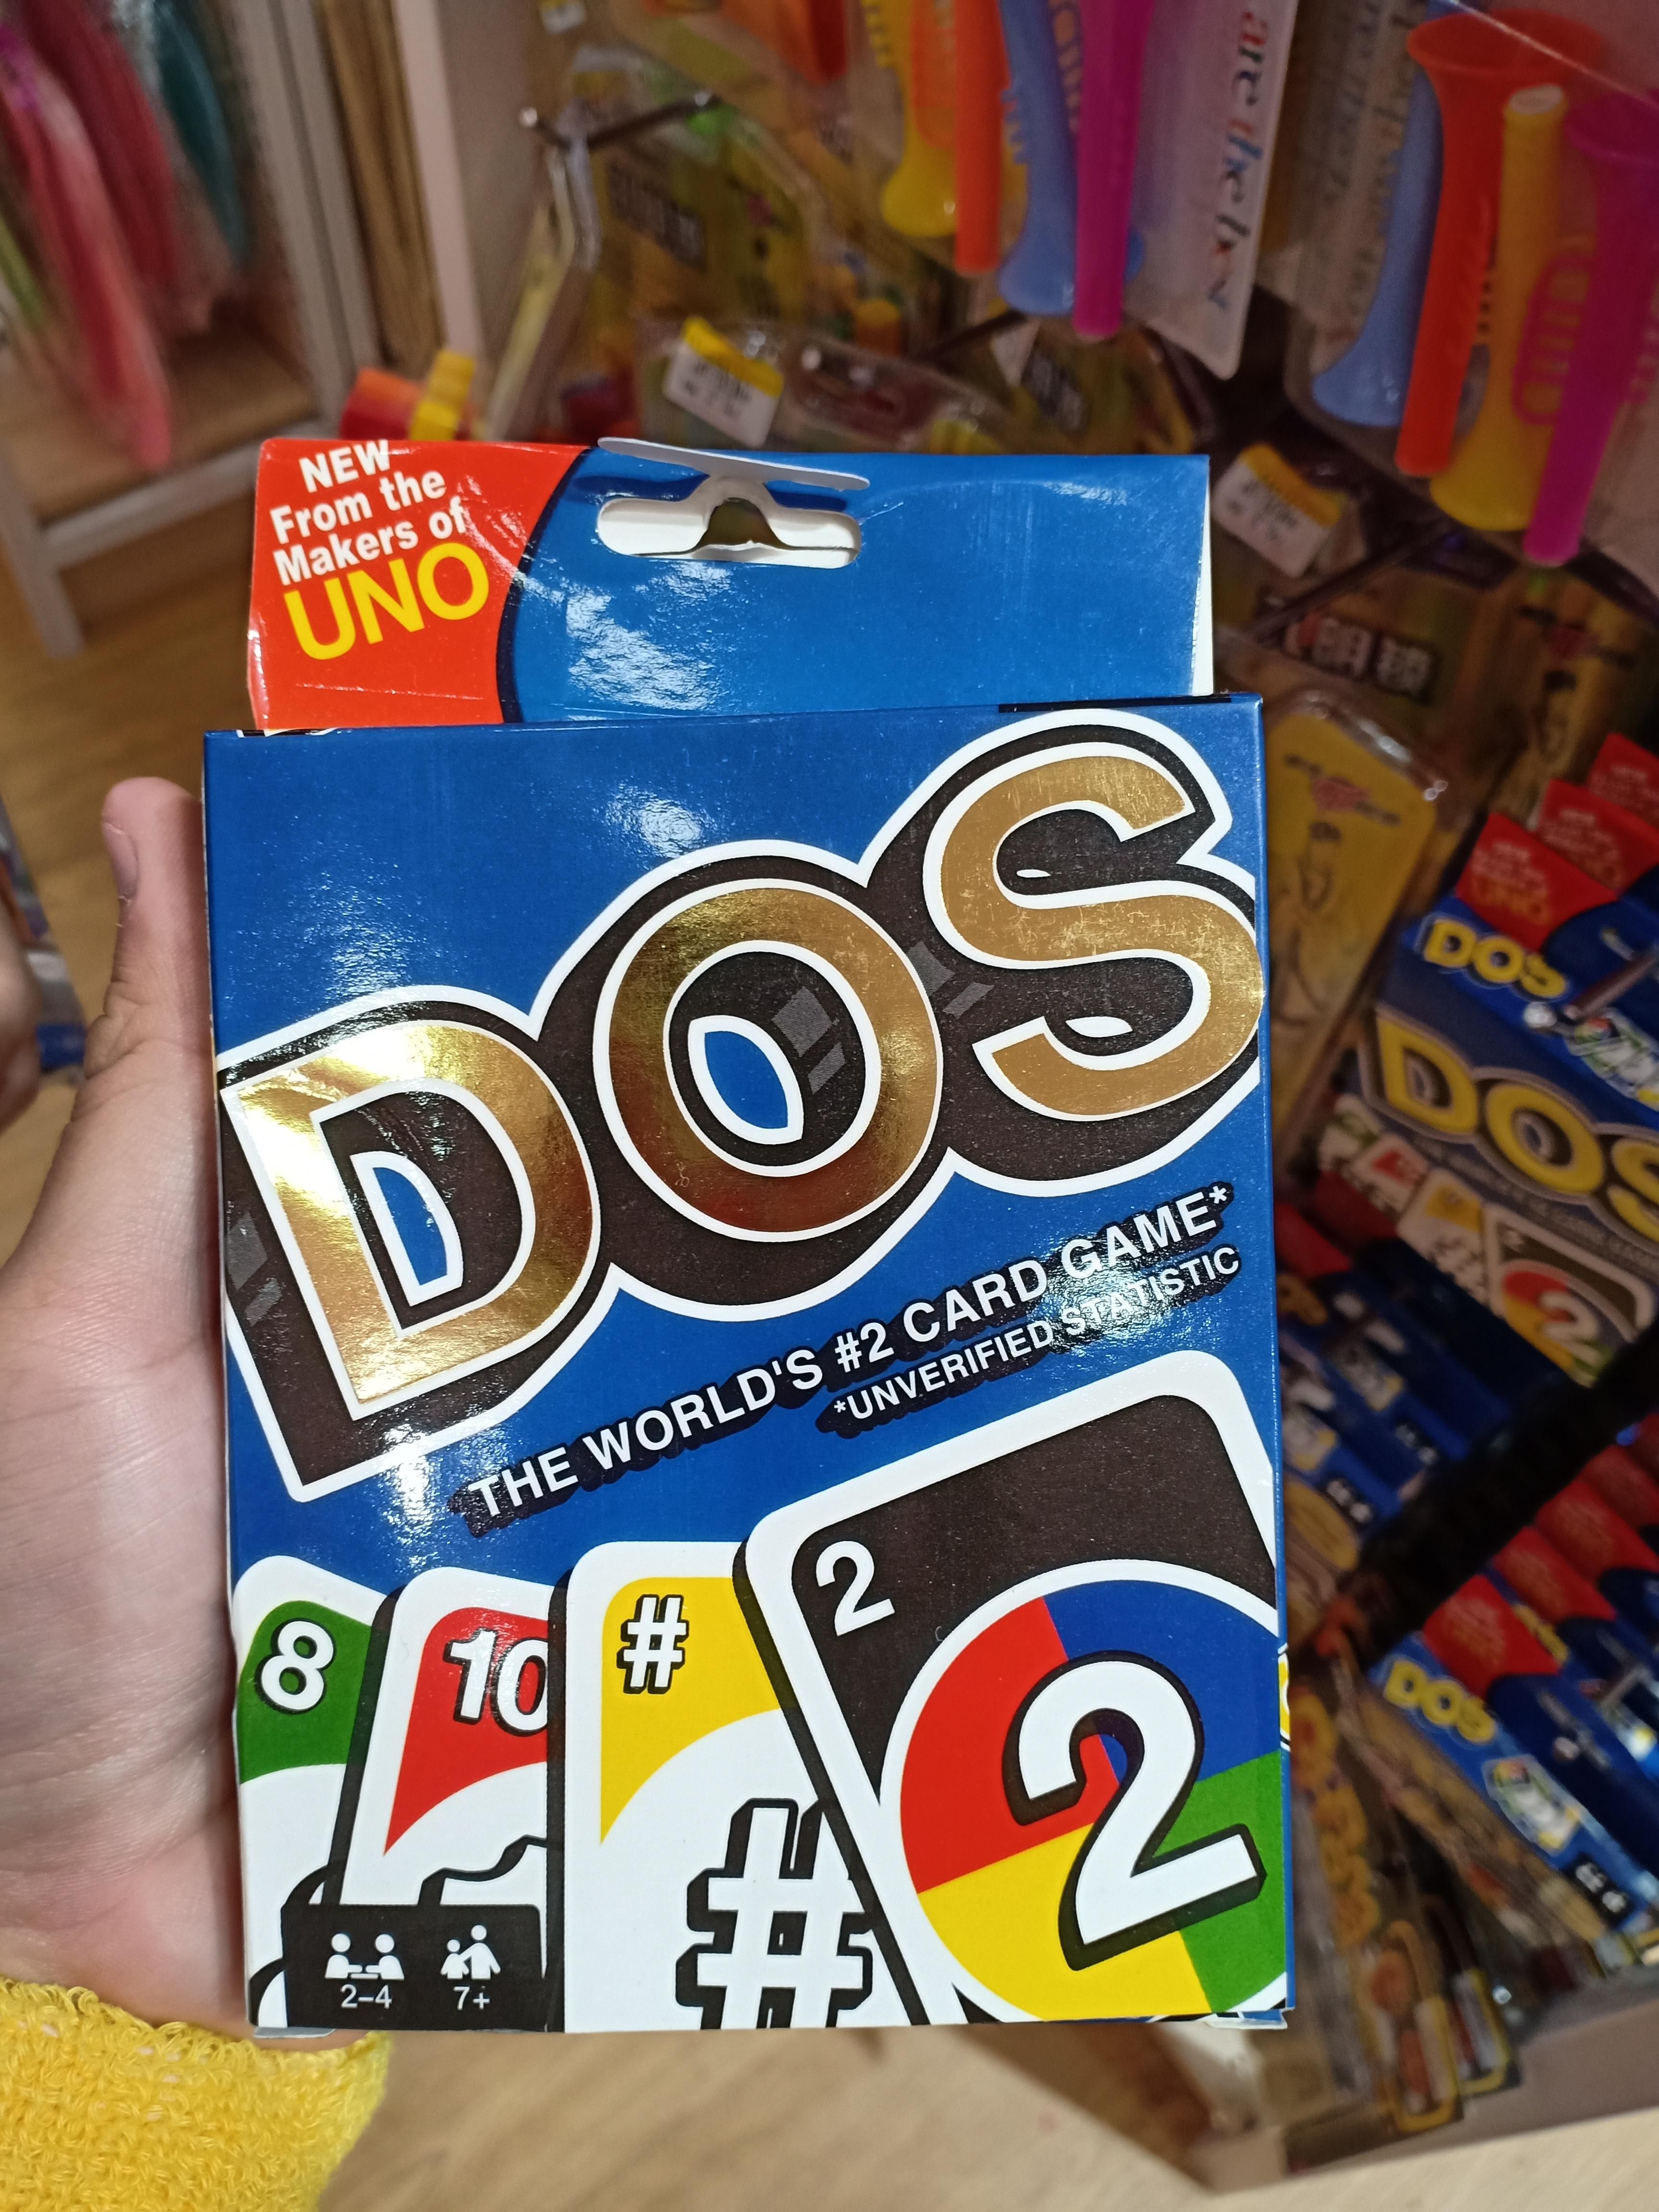 Looks like they did make an UNO sequel...